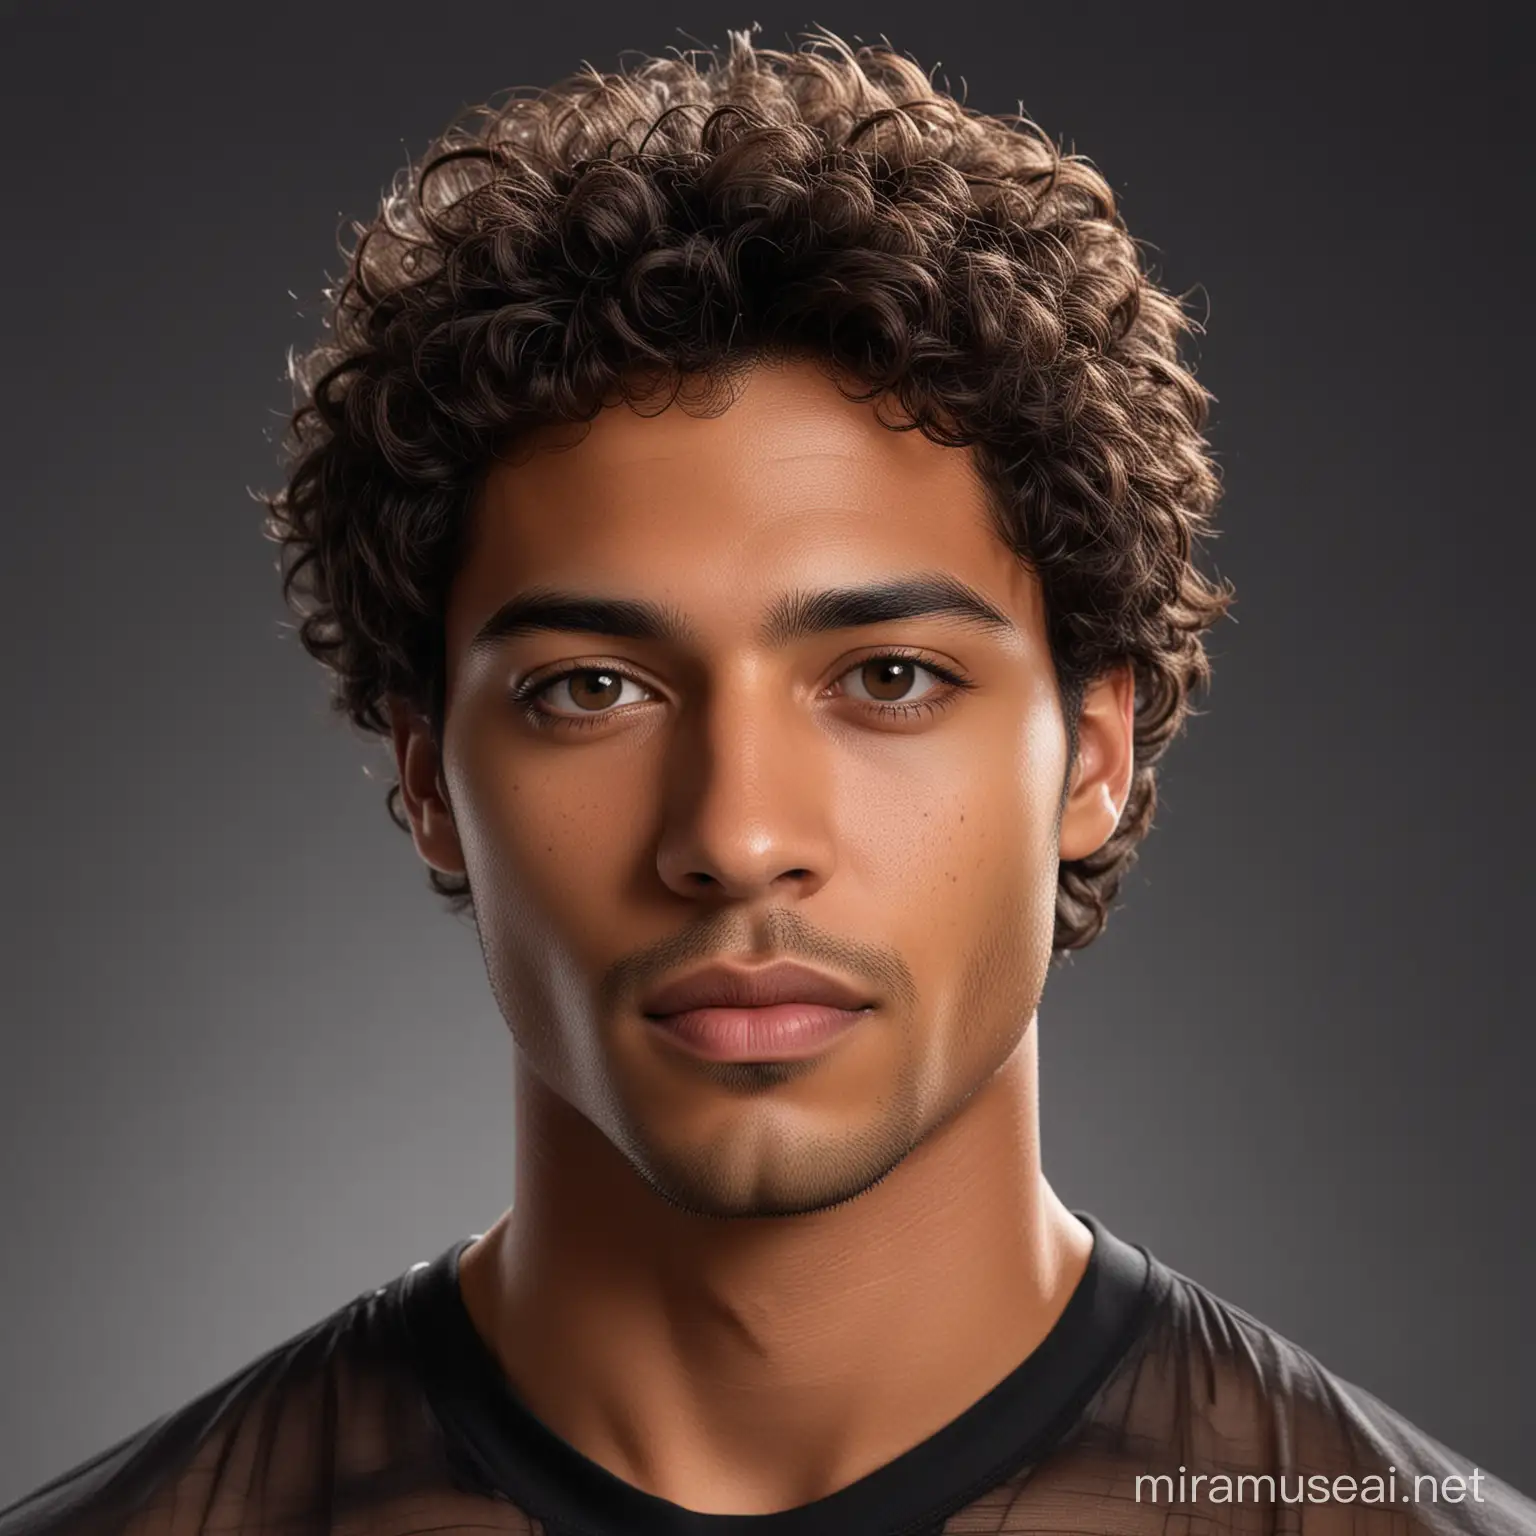 A photorealistic portrait of a 28-year-old man of mixed Black descent, featuring his brown skin, deep brown eyes with a hint of hazel, and thick, silky curly black hair, wearing a thin sheer black modern shirt, focused on a front view with a striking background contrast.